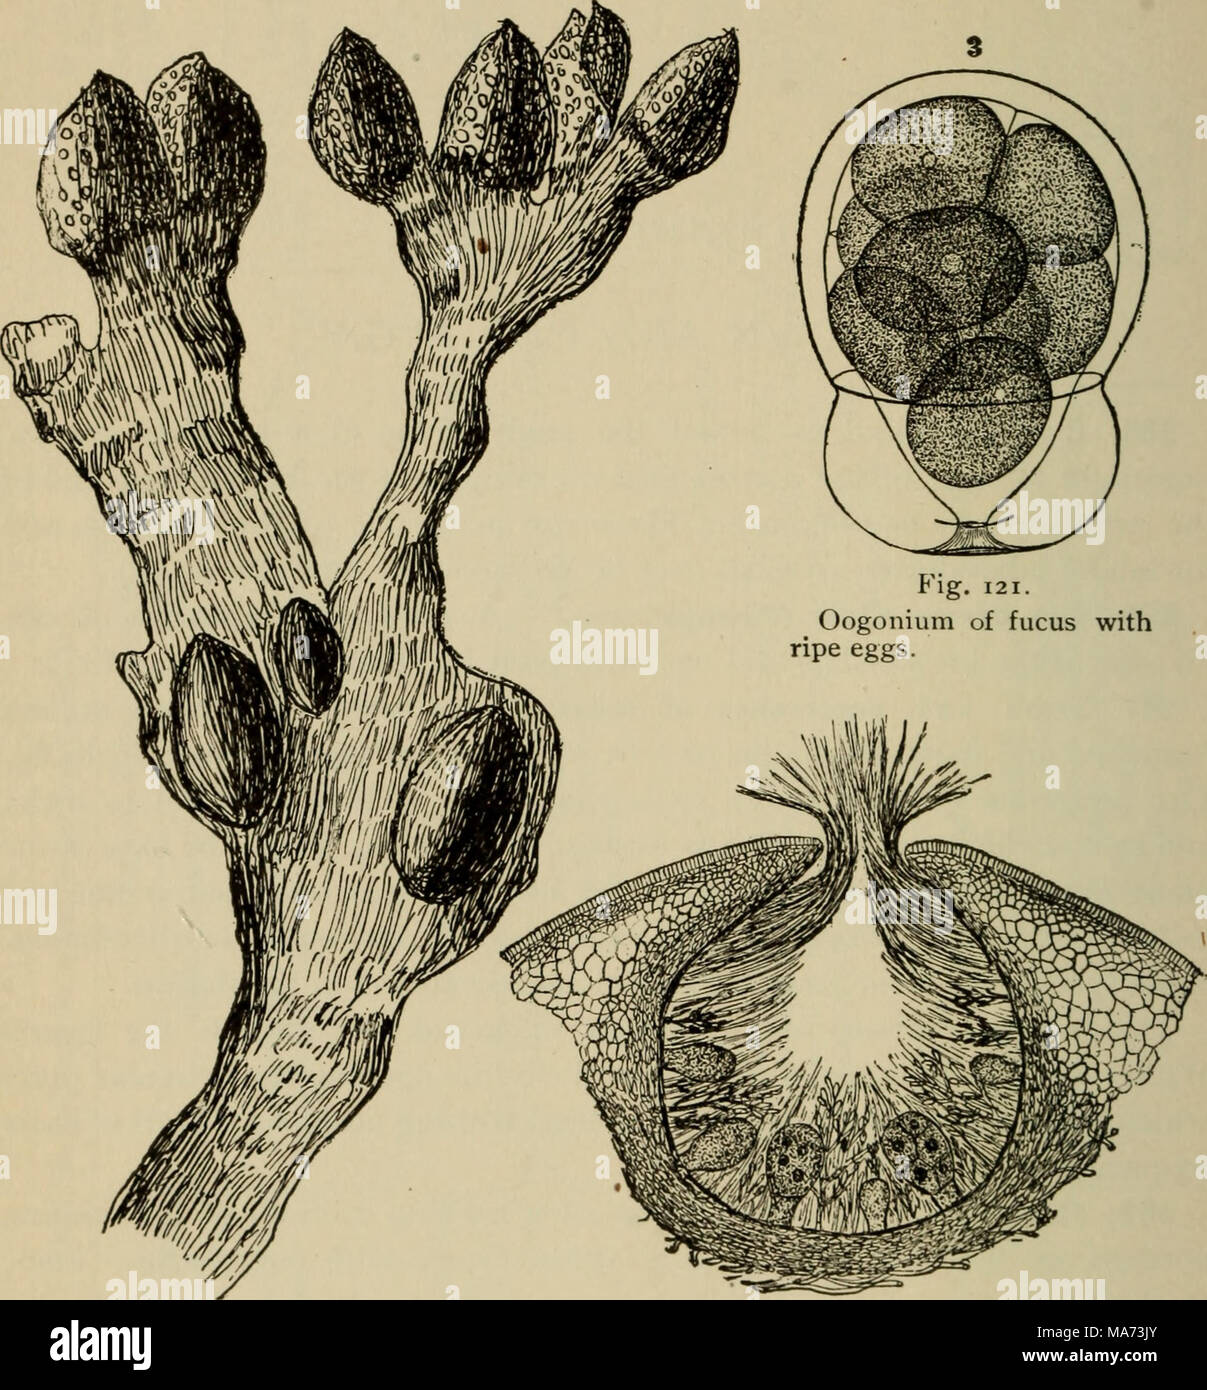 . Elementary botany . Fig. ii9. Portion of plant of fucus showing conceptacles in enlarged ends ; and below the vesicles (Fucus vescicu- losus). Fig. 120. Section of conceptacle of fucus, showing oogonia, and tufts of antheridia. (Lemanea grows only in winter in turbulent water of quite large streams. Batrachospermum grows in rather slow-running water of smaller streams. Both of these inhabit fresh water.) The plants of the group possess chloro- phyll, but it is usually obscured by a reddish or purple pigment. 271. Gracillaria —Gracillaria is one of the marine forms, and one species i^ illustr Stock Photo